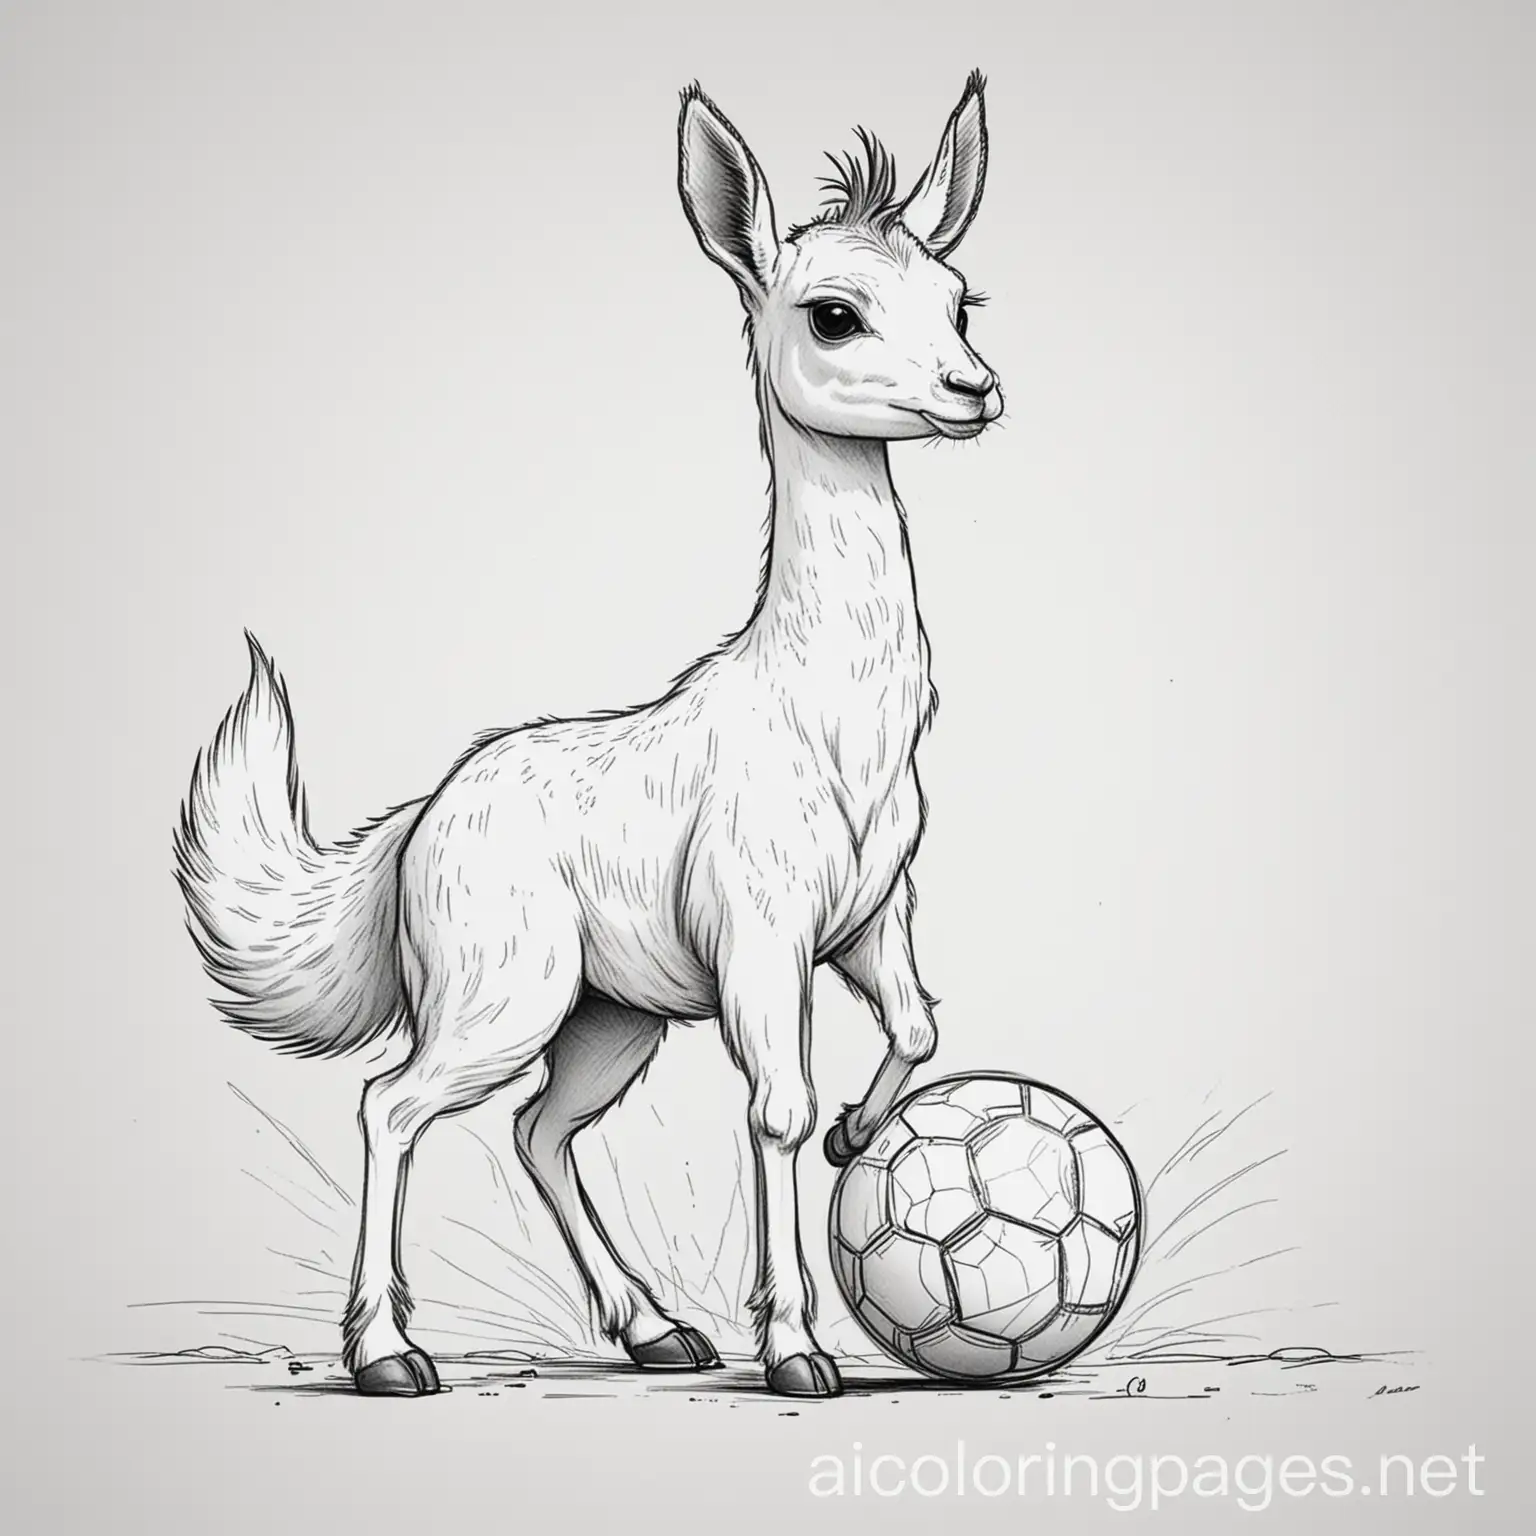 vicuña jugando futbol, Coloring Page, black and white, line art, white background, Simplicity, Ample White Space. The background of the coloring page is plain white to make it easy for young children to color within the lines. The outlines of all the subjects are easy to distinguish, making it simple for kids to color without too much difficulty